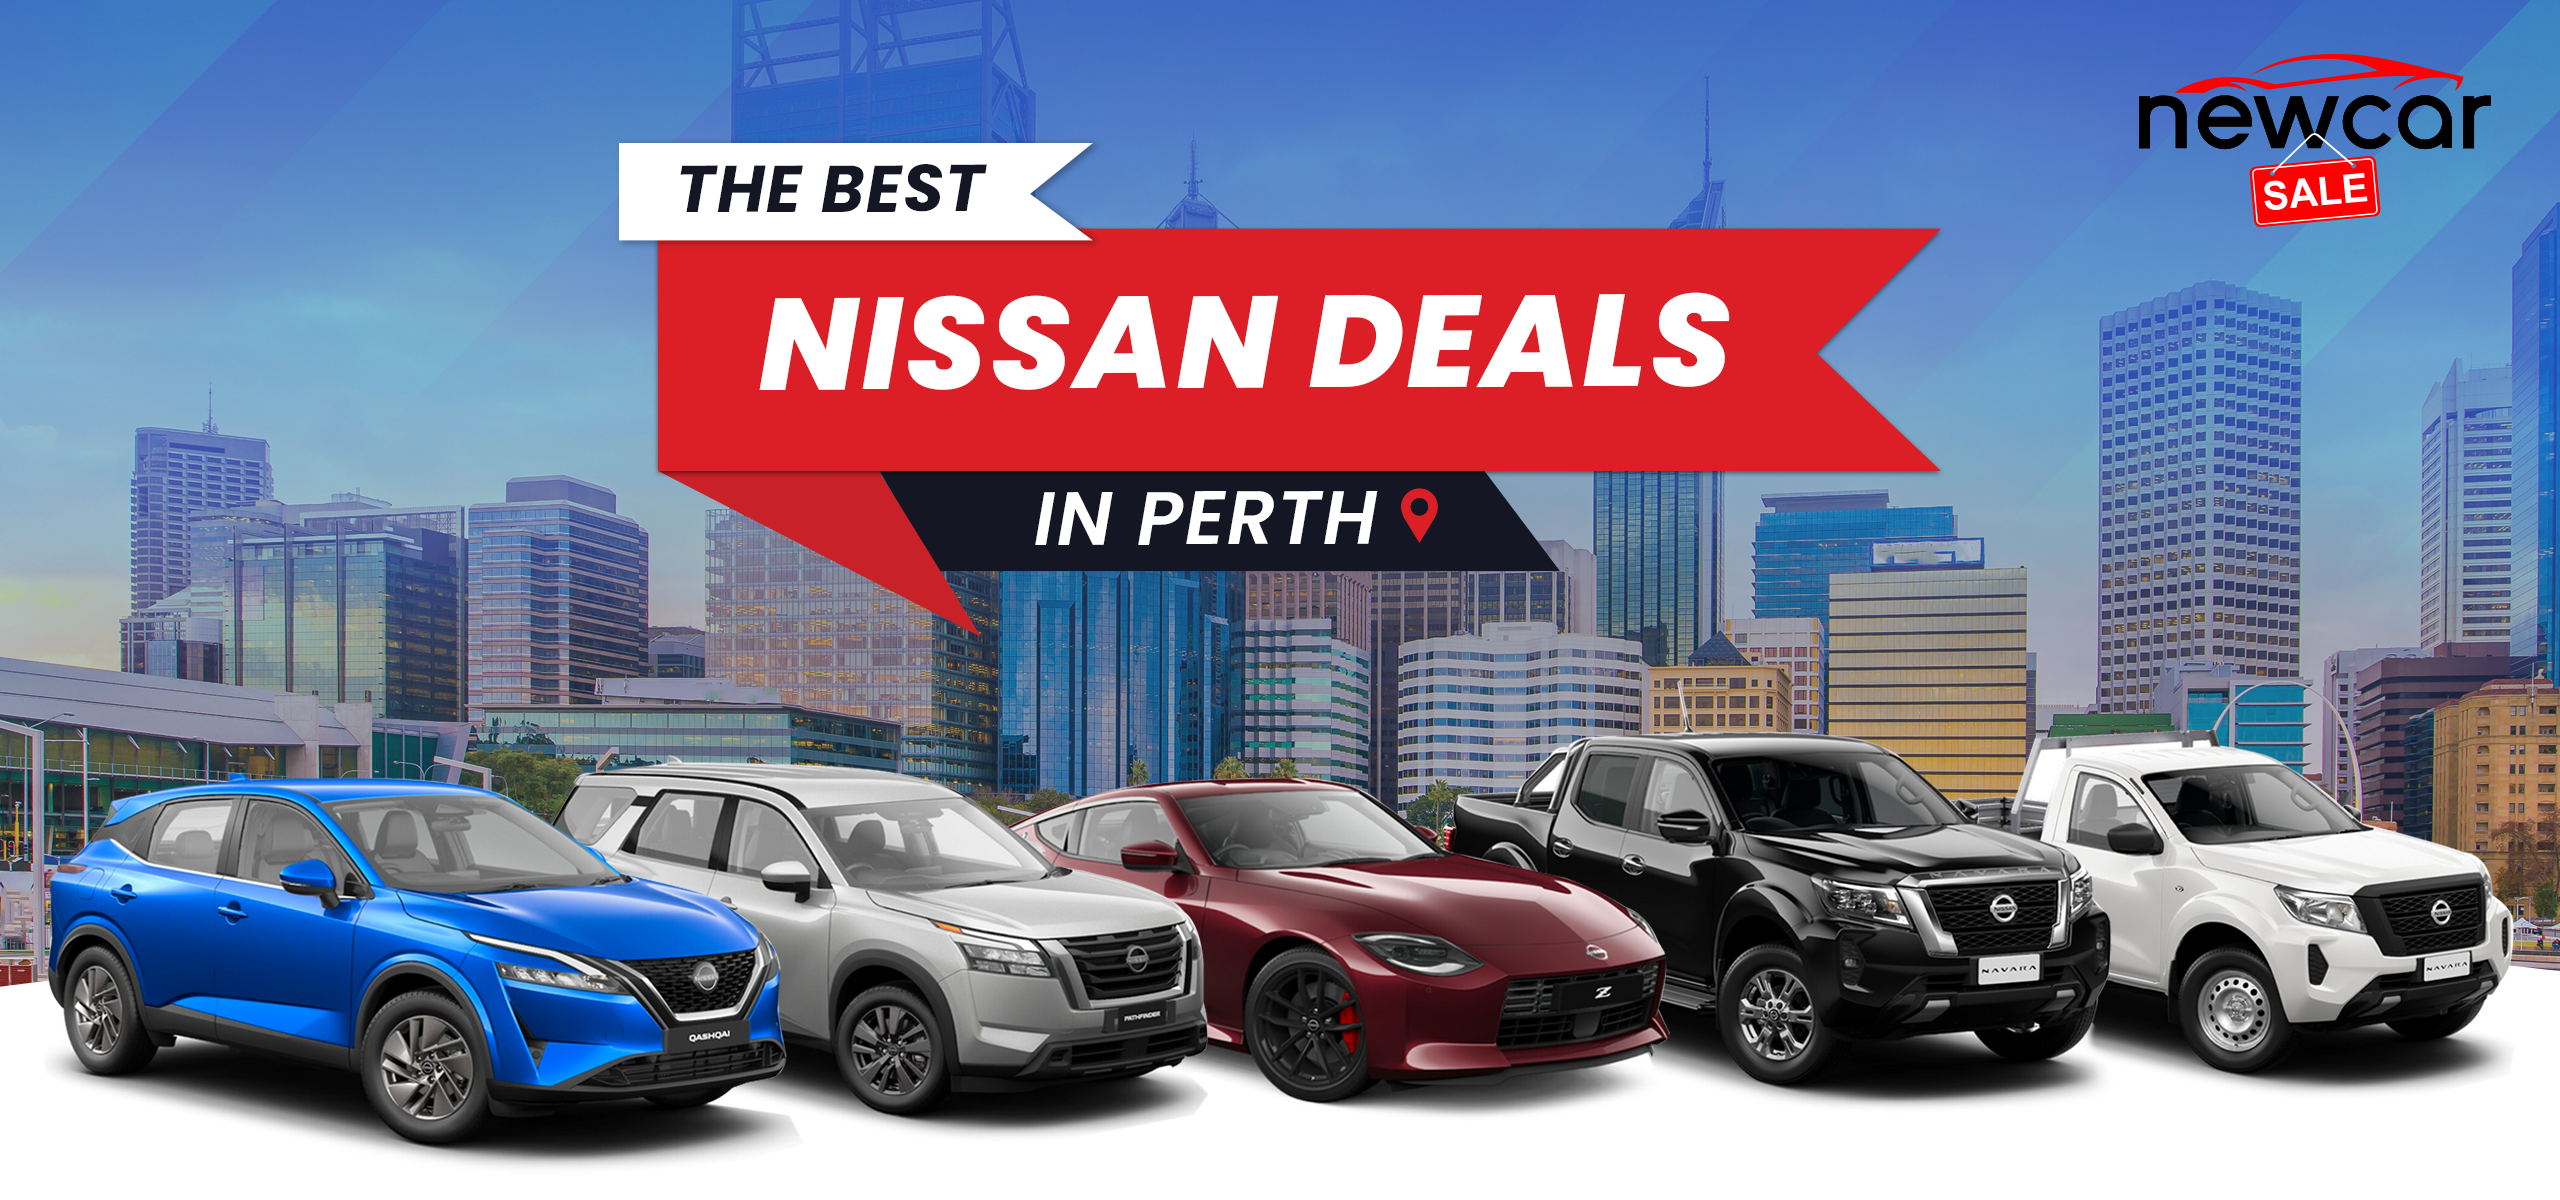 The Best Nissan Deals in Perth